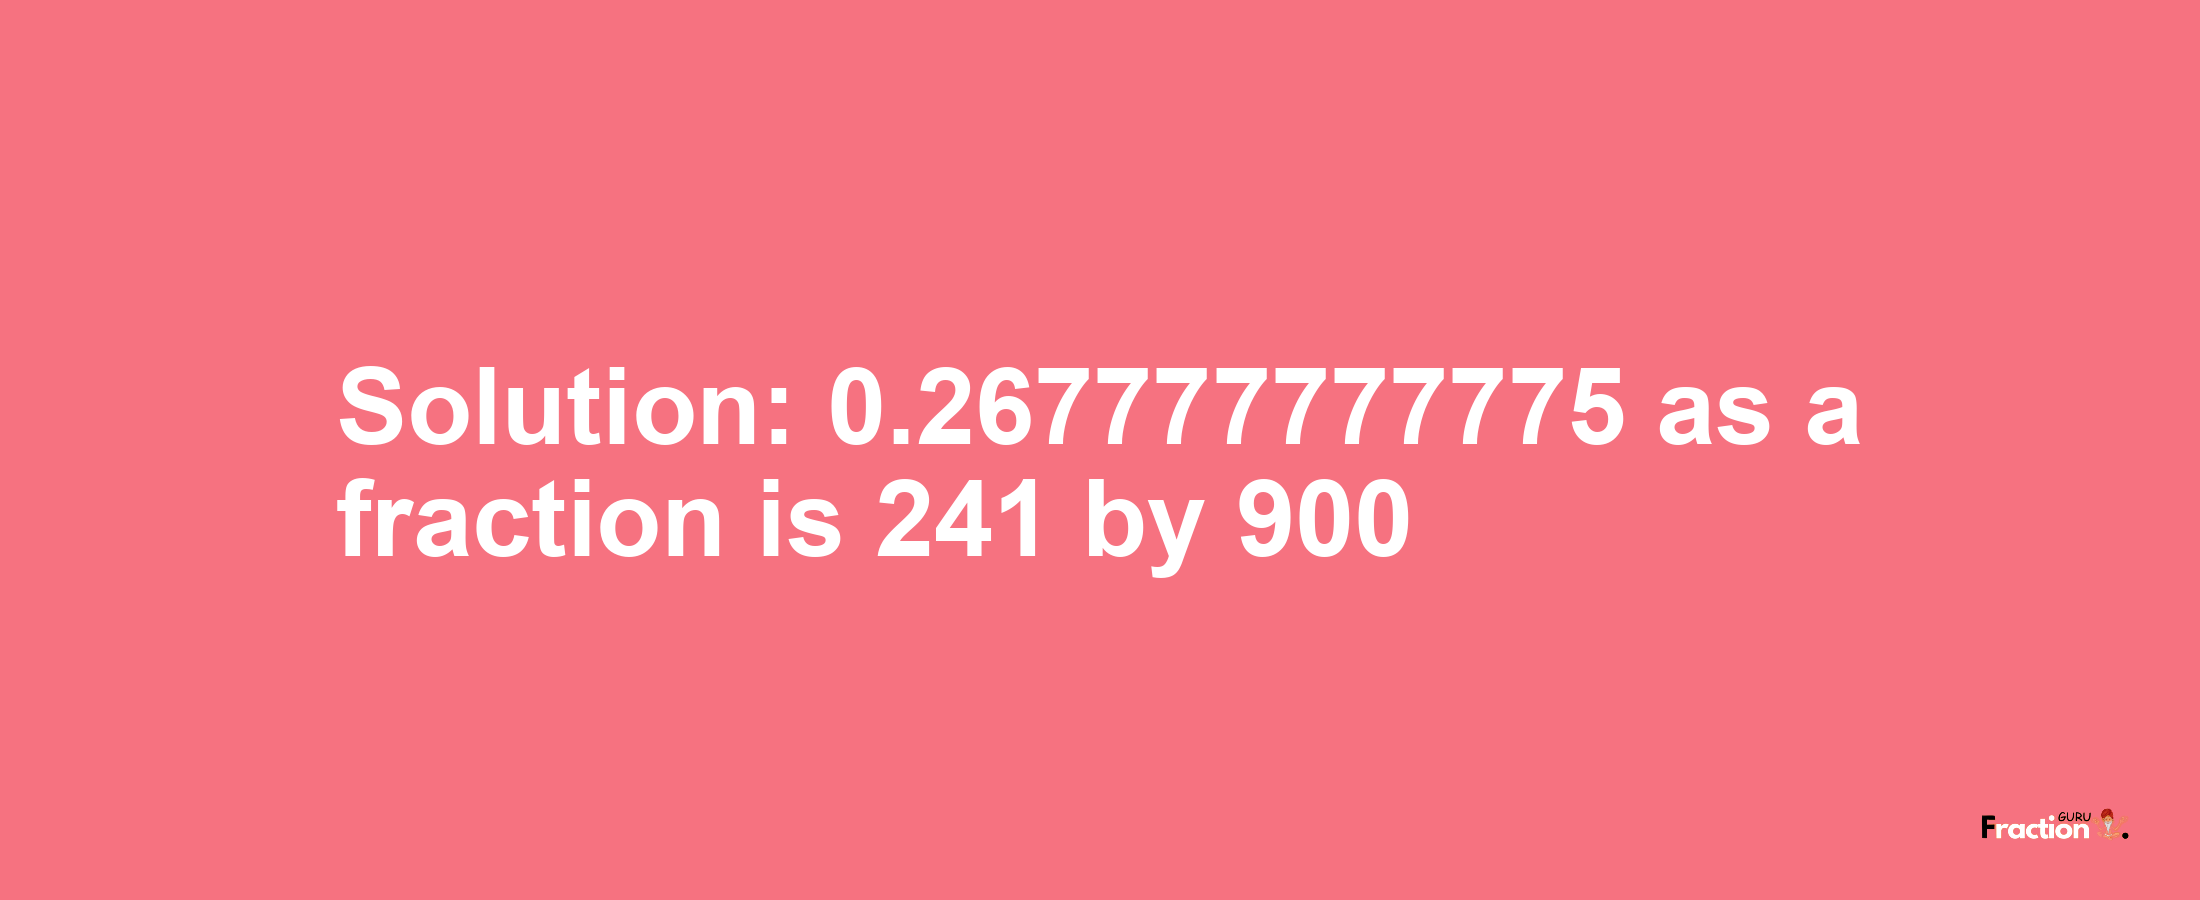 Solution:0.267777777775 as a fraction is 241/900